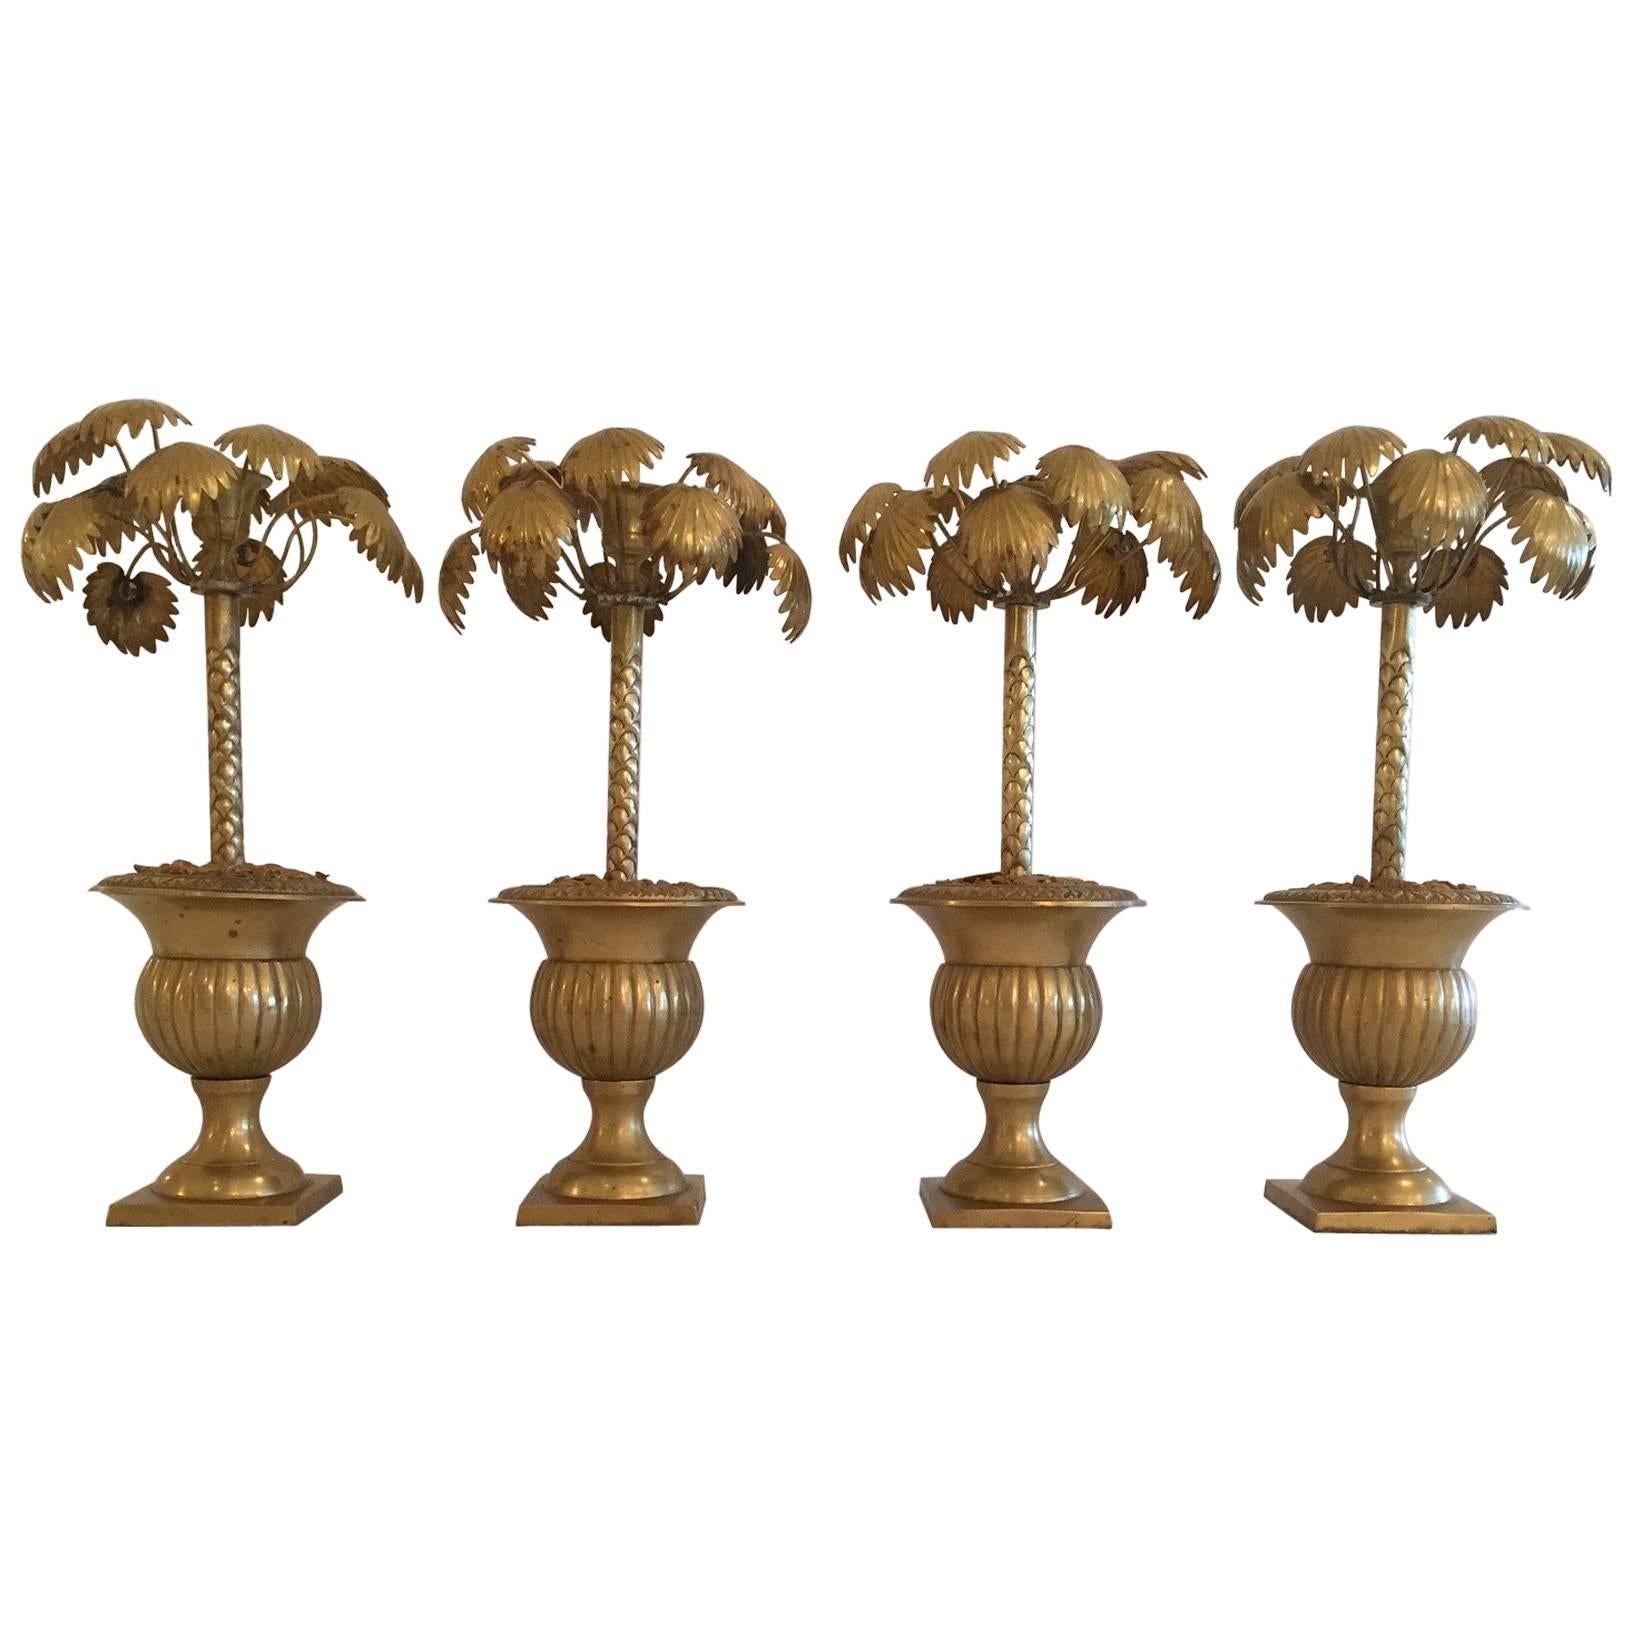 Set of Four Wonderfully Whimsical Potted Palm Tree Brass Candlesticks